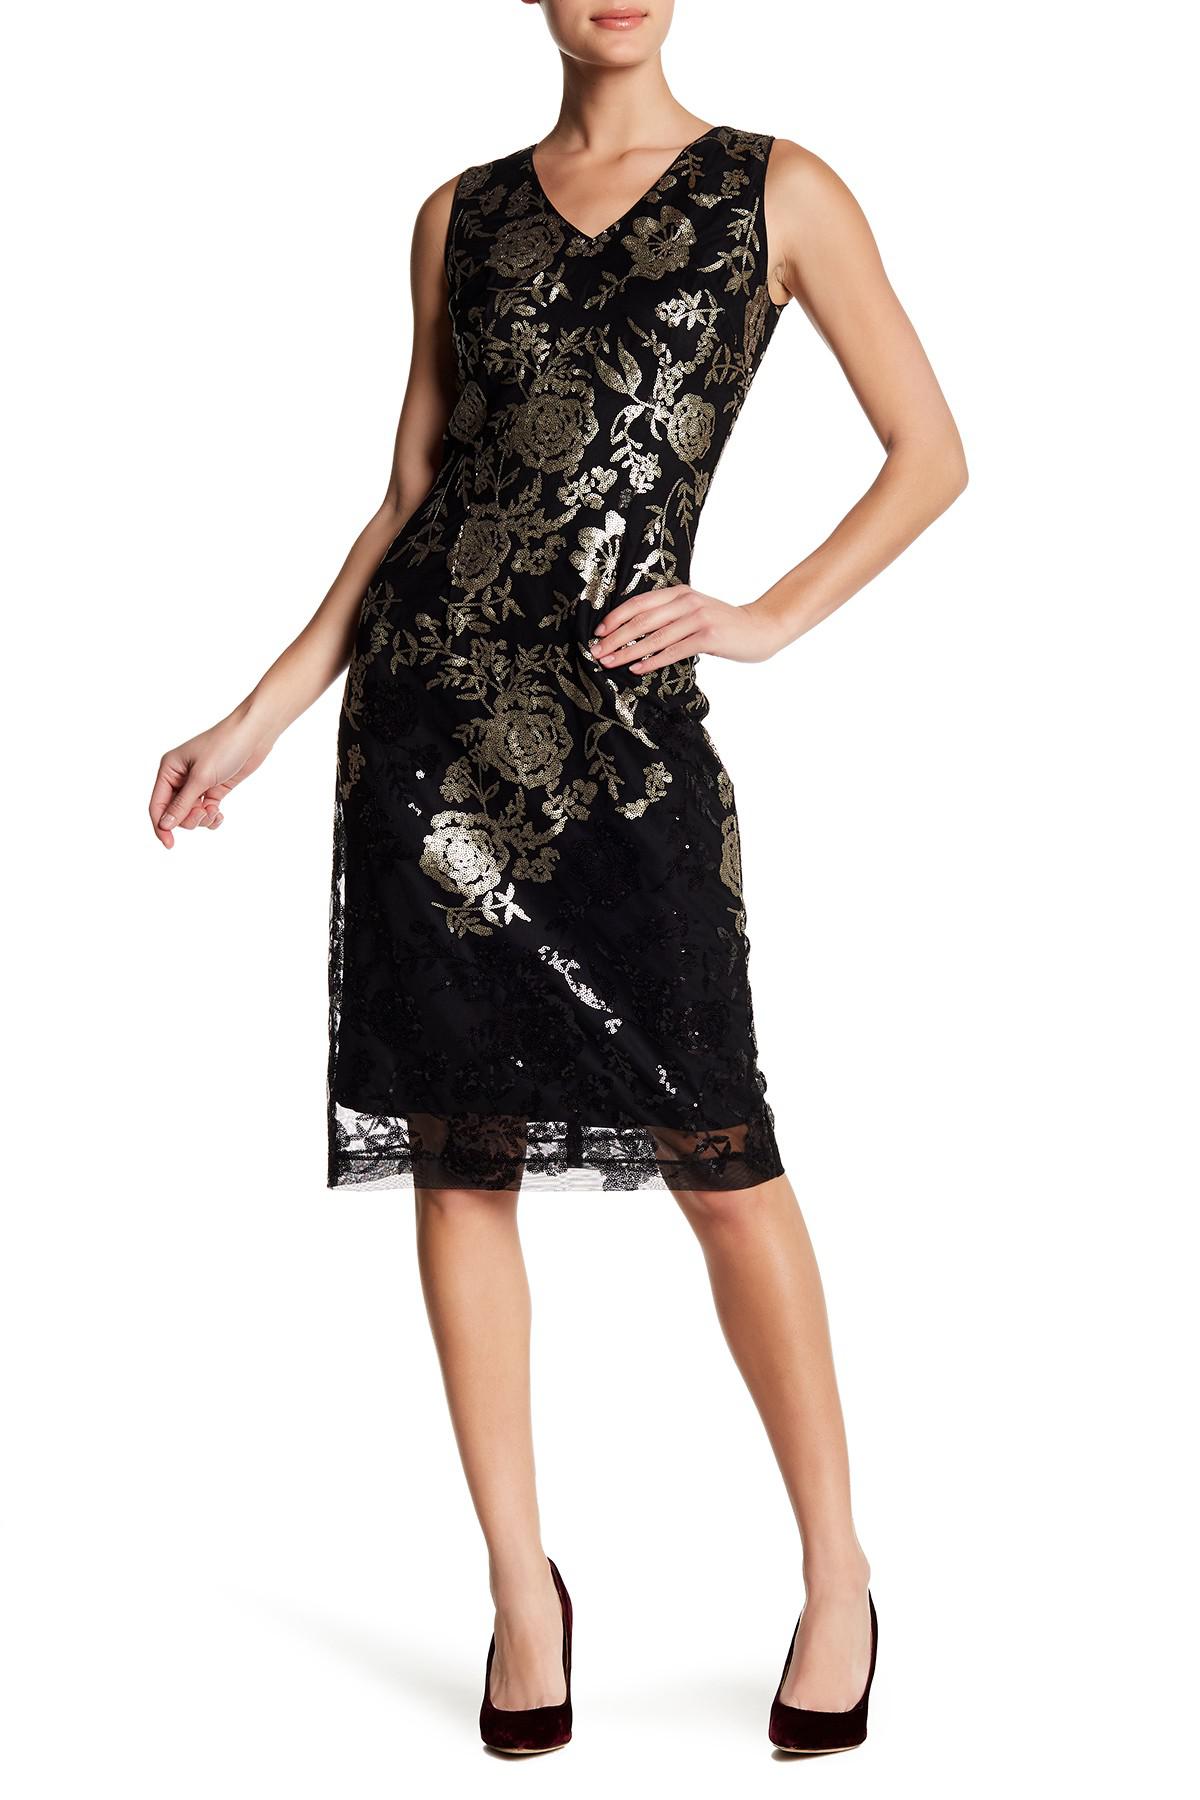 Lyst - Donna Ricco Floral Sequins Sleeveless Dress in Black